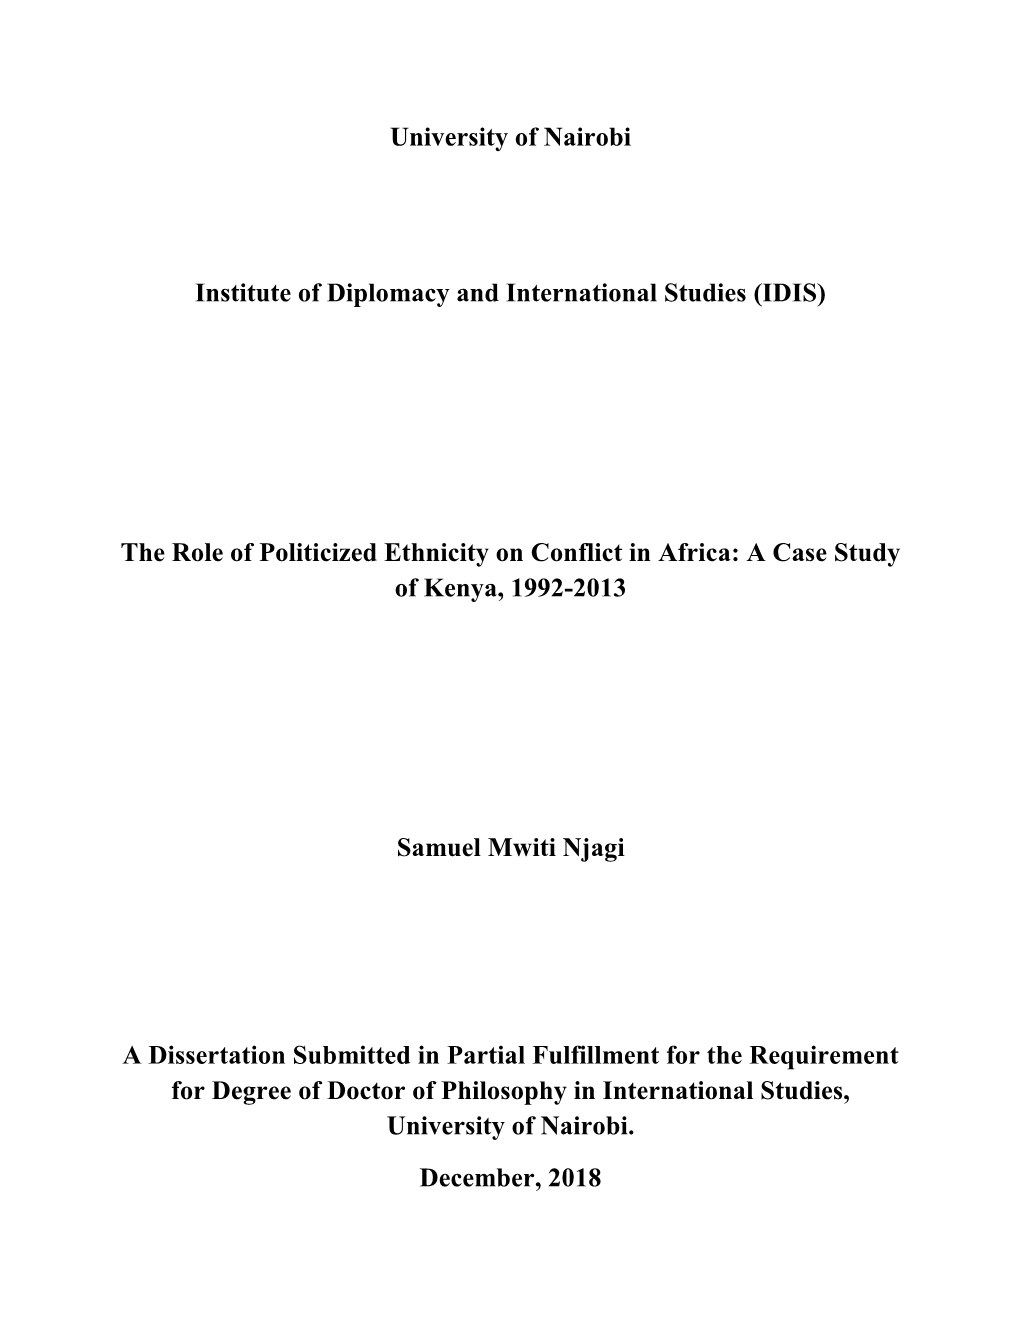 The Role of Politicized Ethnicity on Conflict in Africa: a Case Study of Kenya, 1992-2013